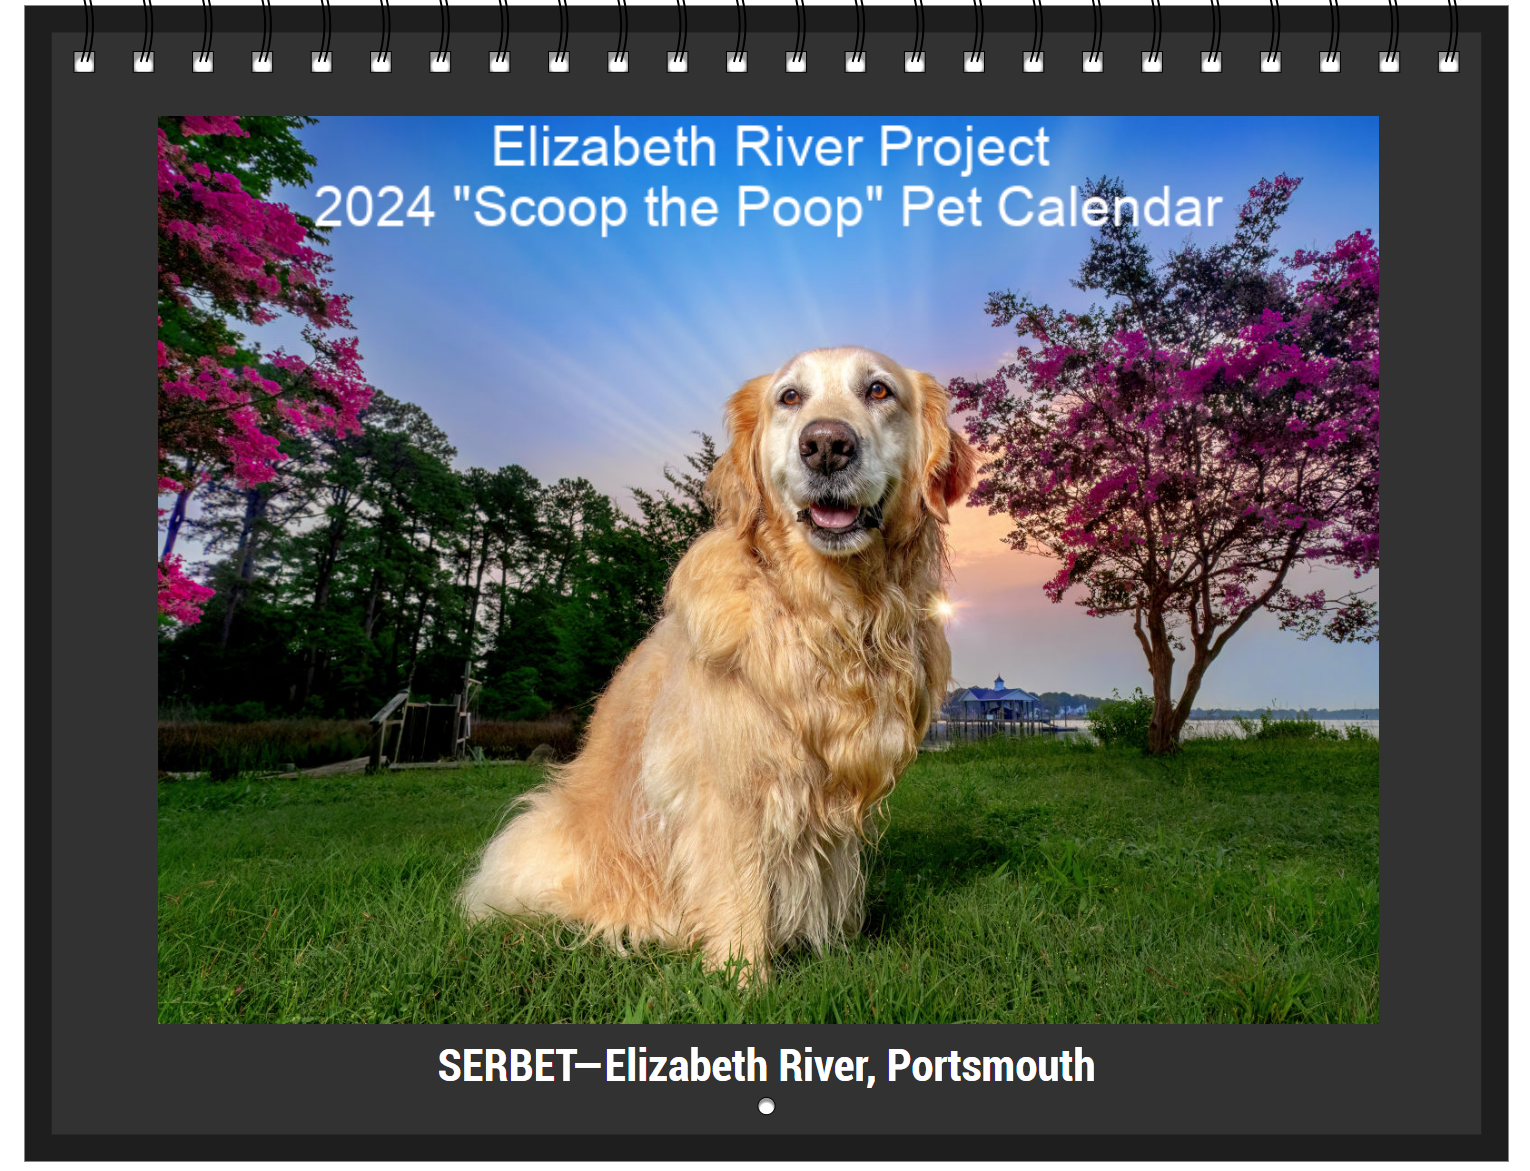 The cover image of the 2024 Scoop the Poop pet calendar. Proceeds support the Elizabeth River Project.